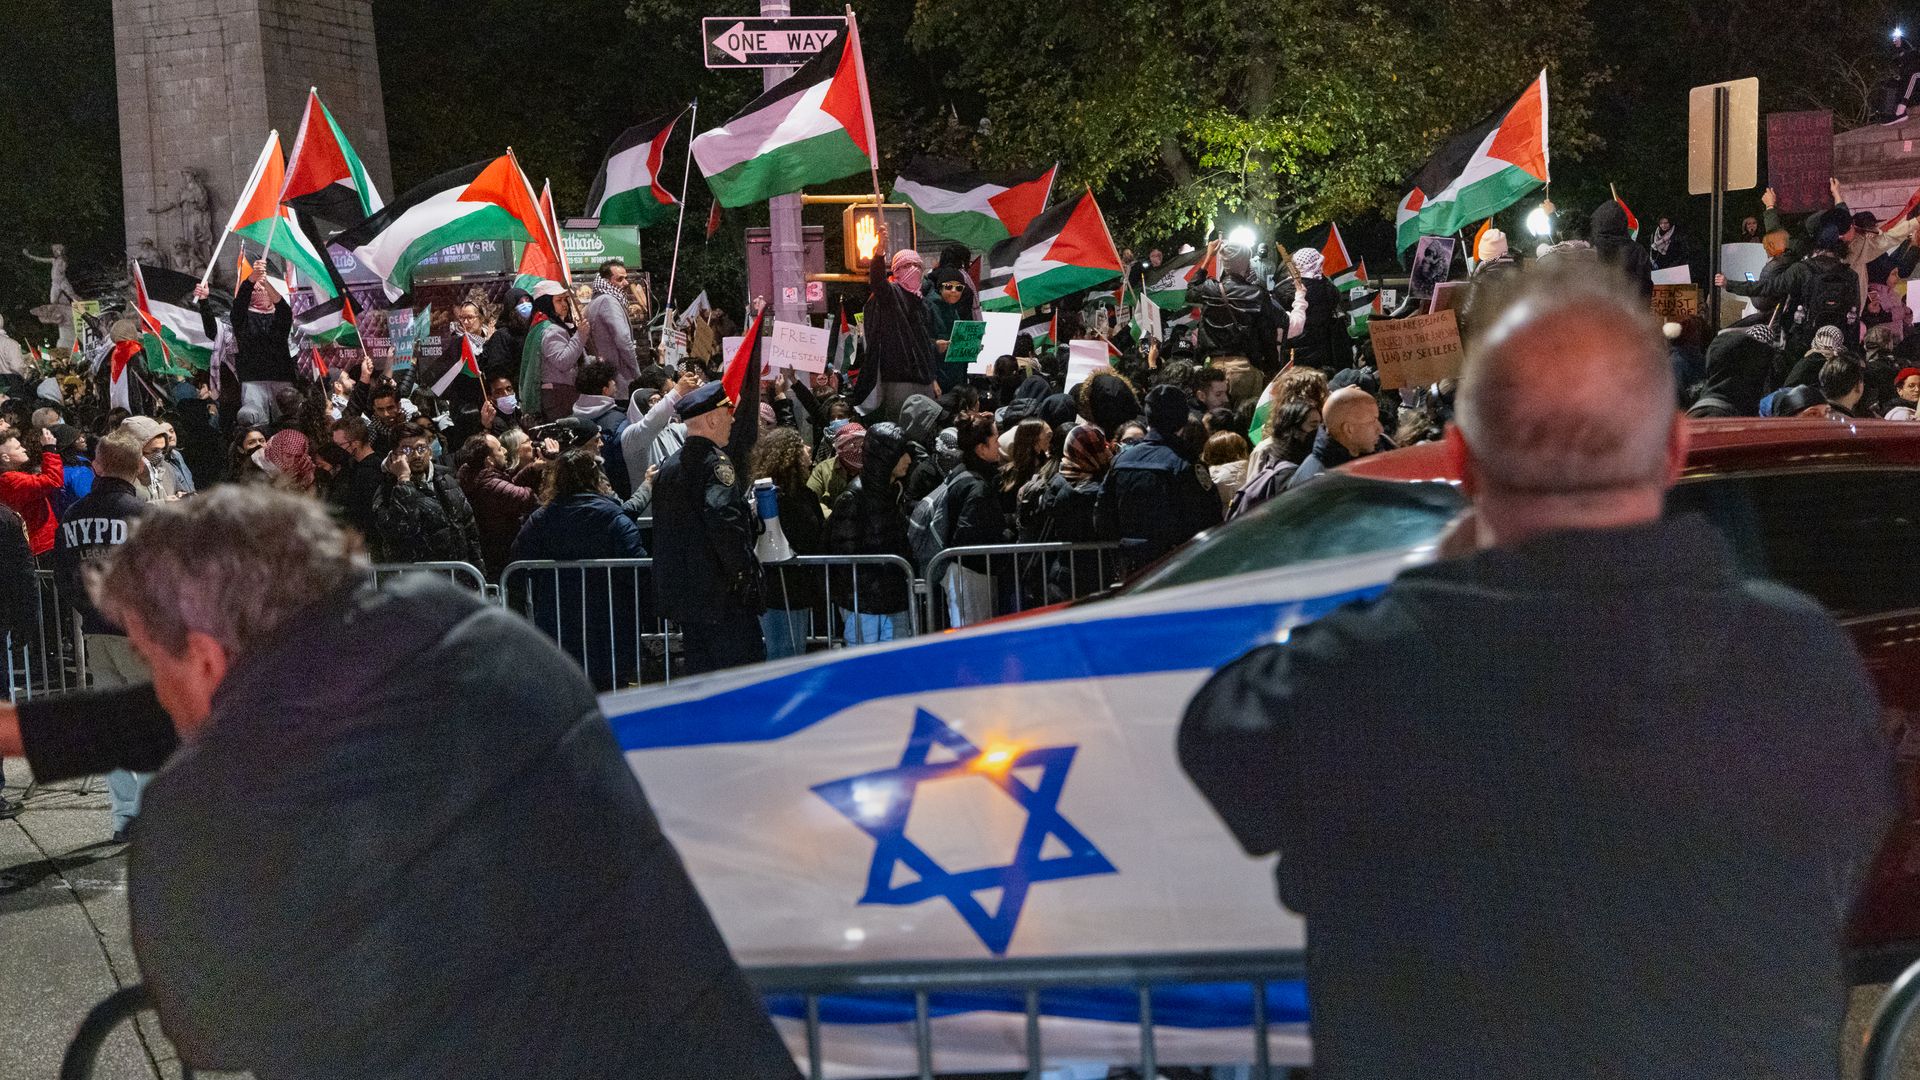 People holding Israeli and Palestinian flags during protests in New York City on Nov. 11.